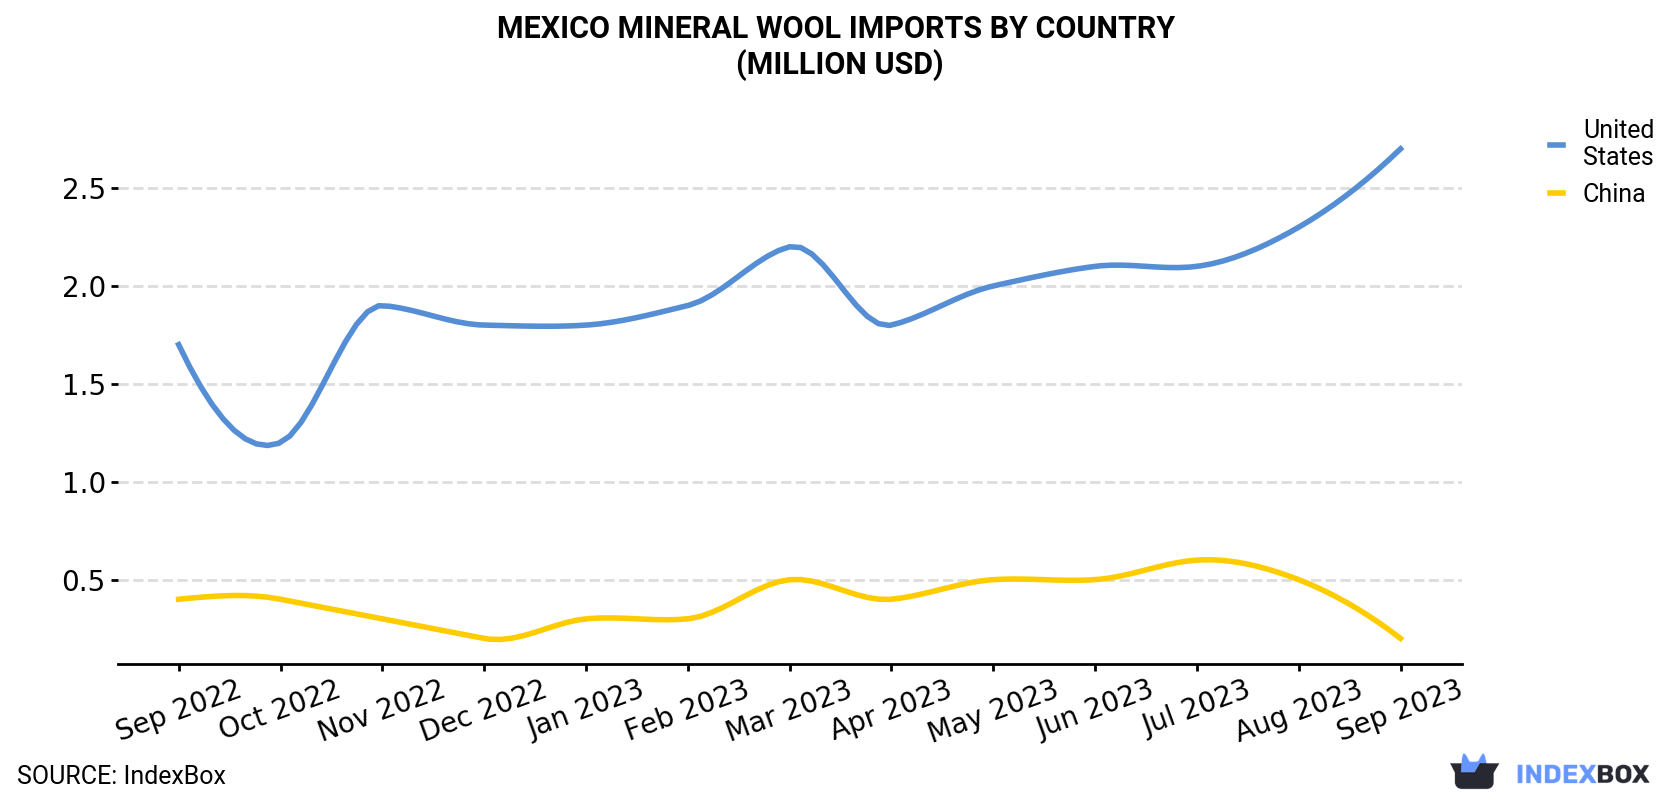 Mexico Mineral Wool Imports By Country (Million USD)